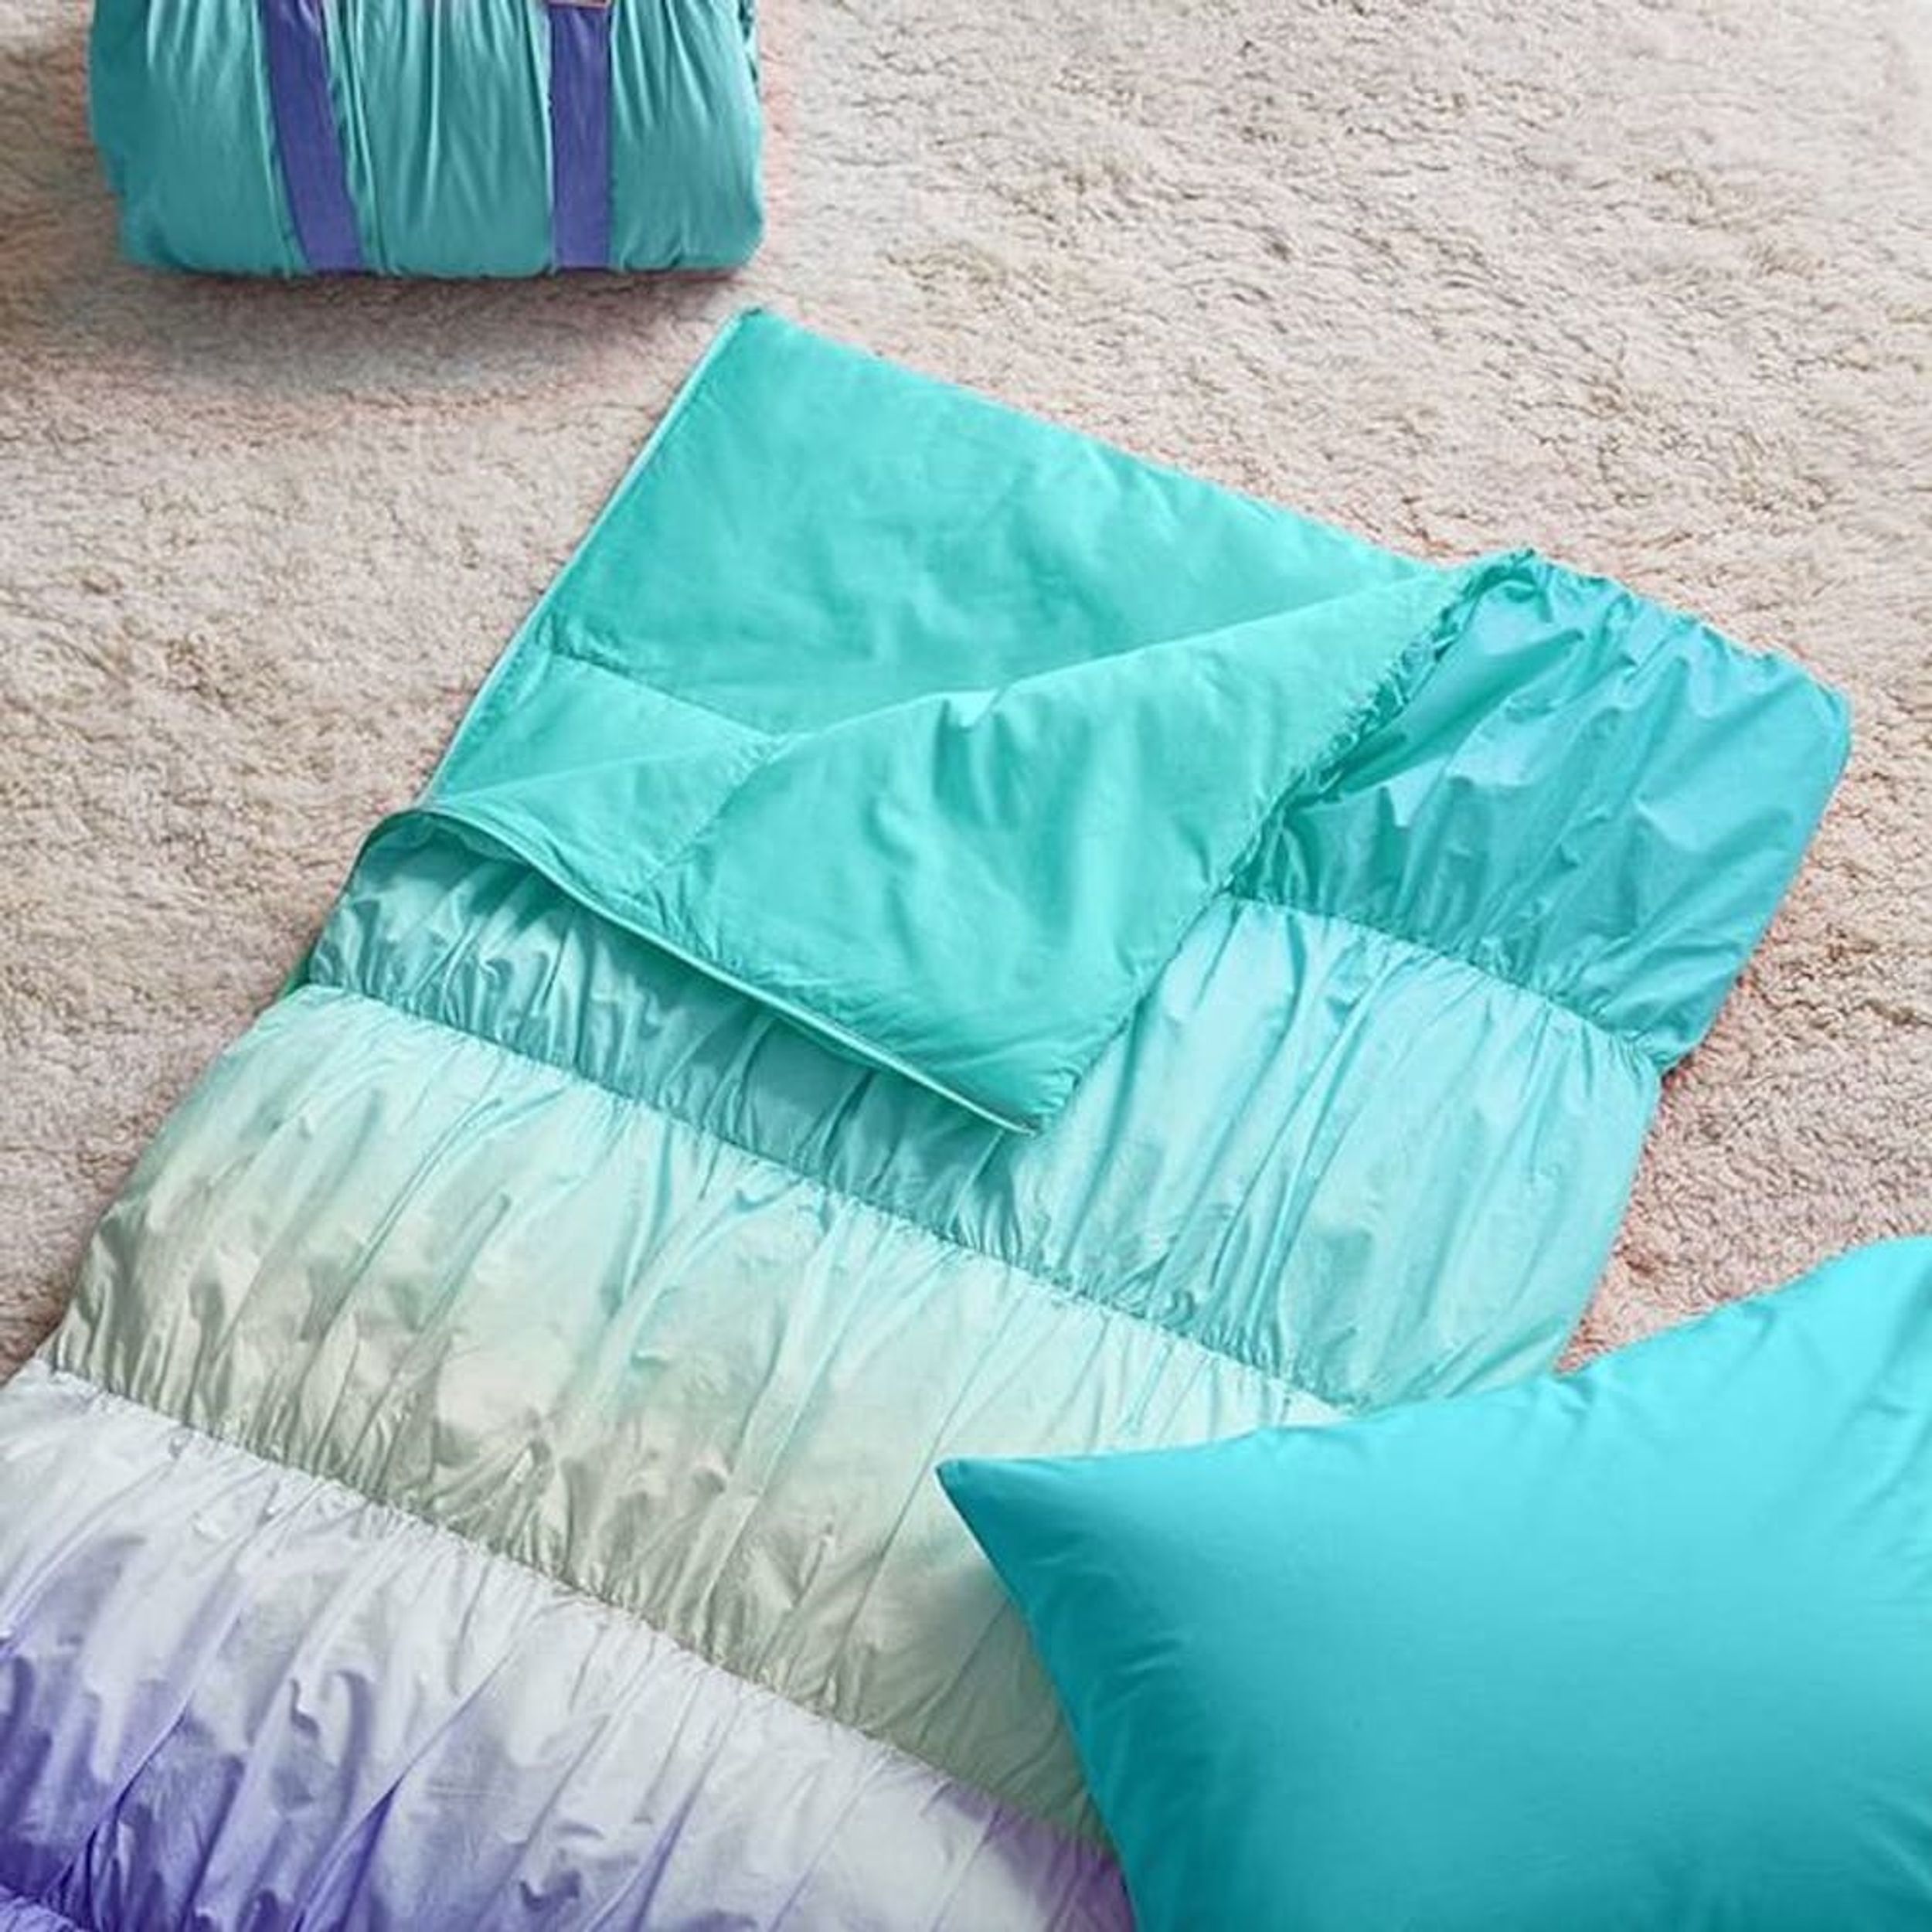 13 Adorable Kids Sleeping Bags You’ll Want for Yourself